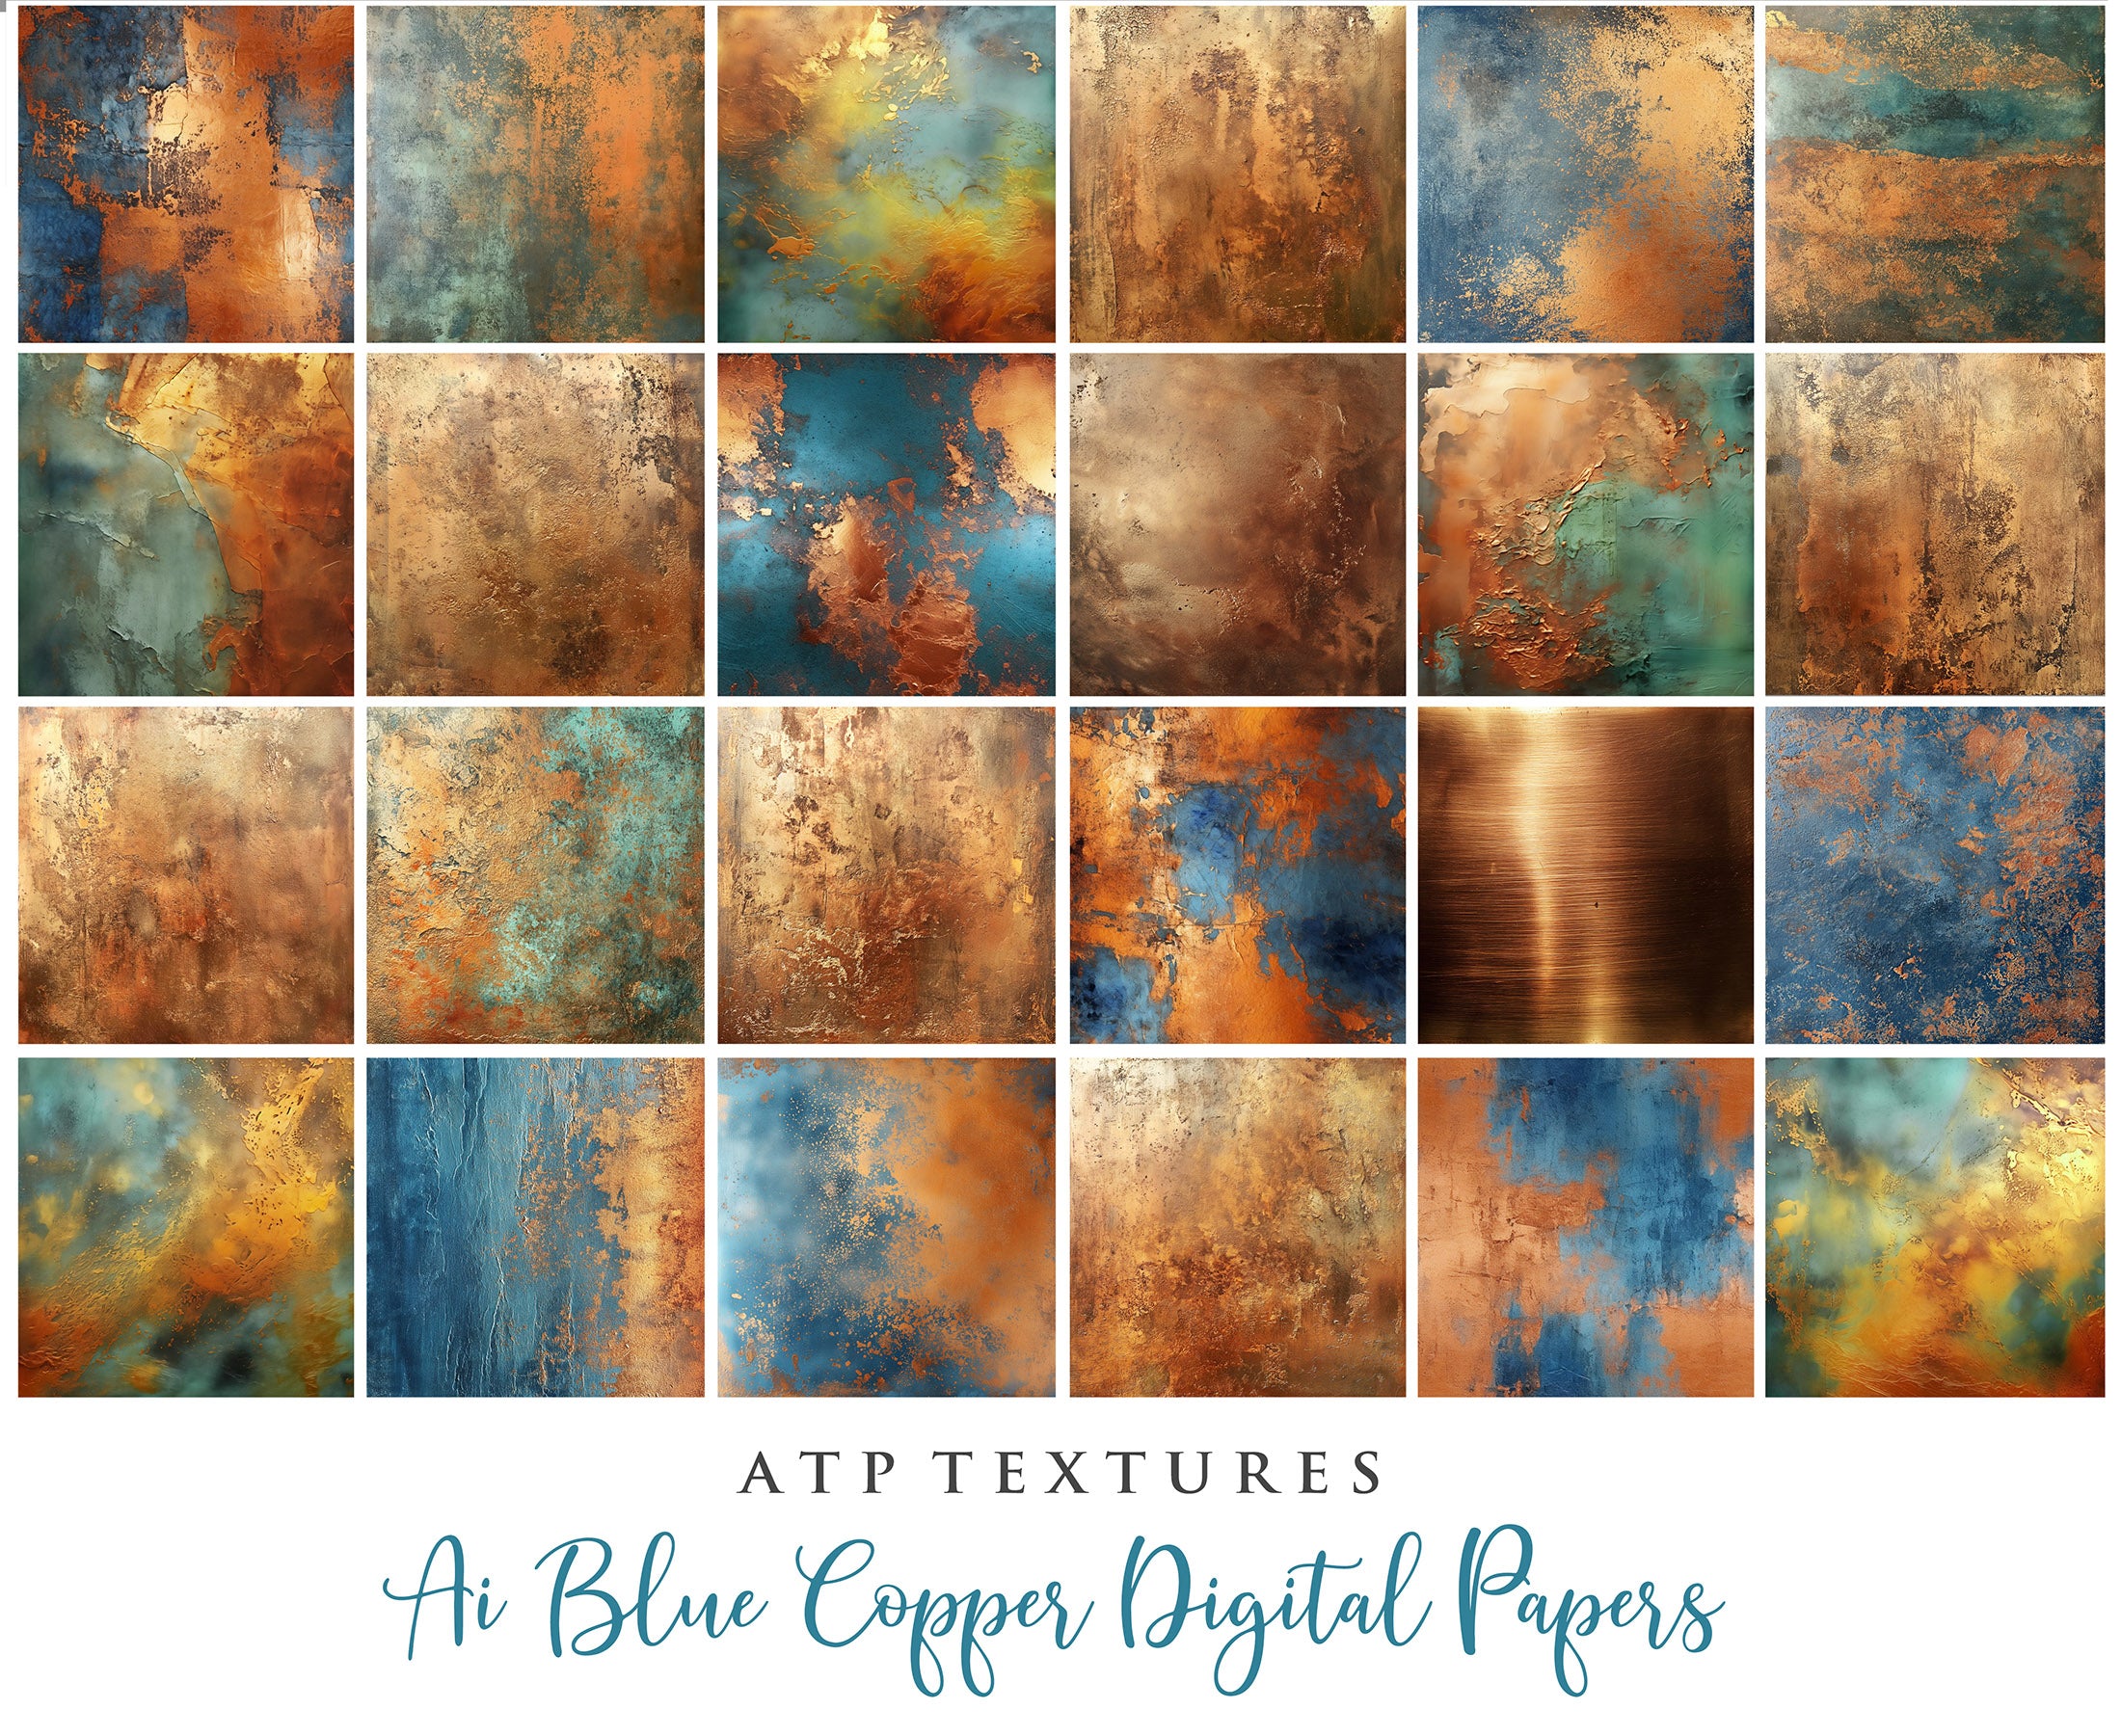 Copper Blue Green Textured Digital Scrapbooking Papers. Each Paper is 300dpi and 4000 x 4000.These are in Jpeg format and high resolution. They average between 4MB to 7MB each. Find Actions, Presets, Overlays, Flares and many quality graphic effects for Photography and Photoshop. ATP Textures.